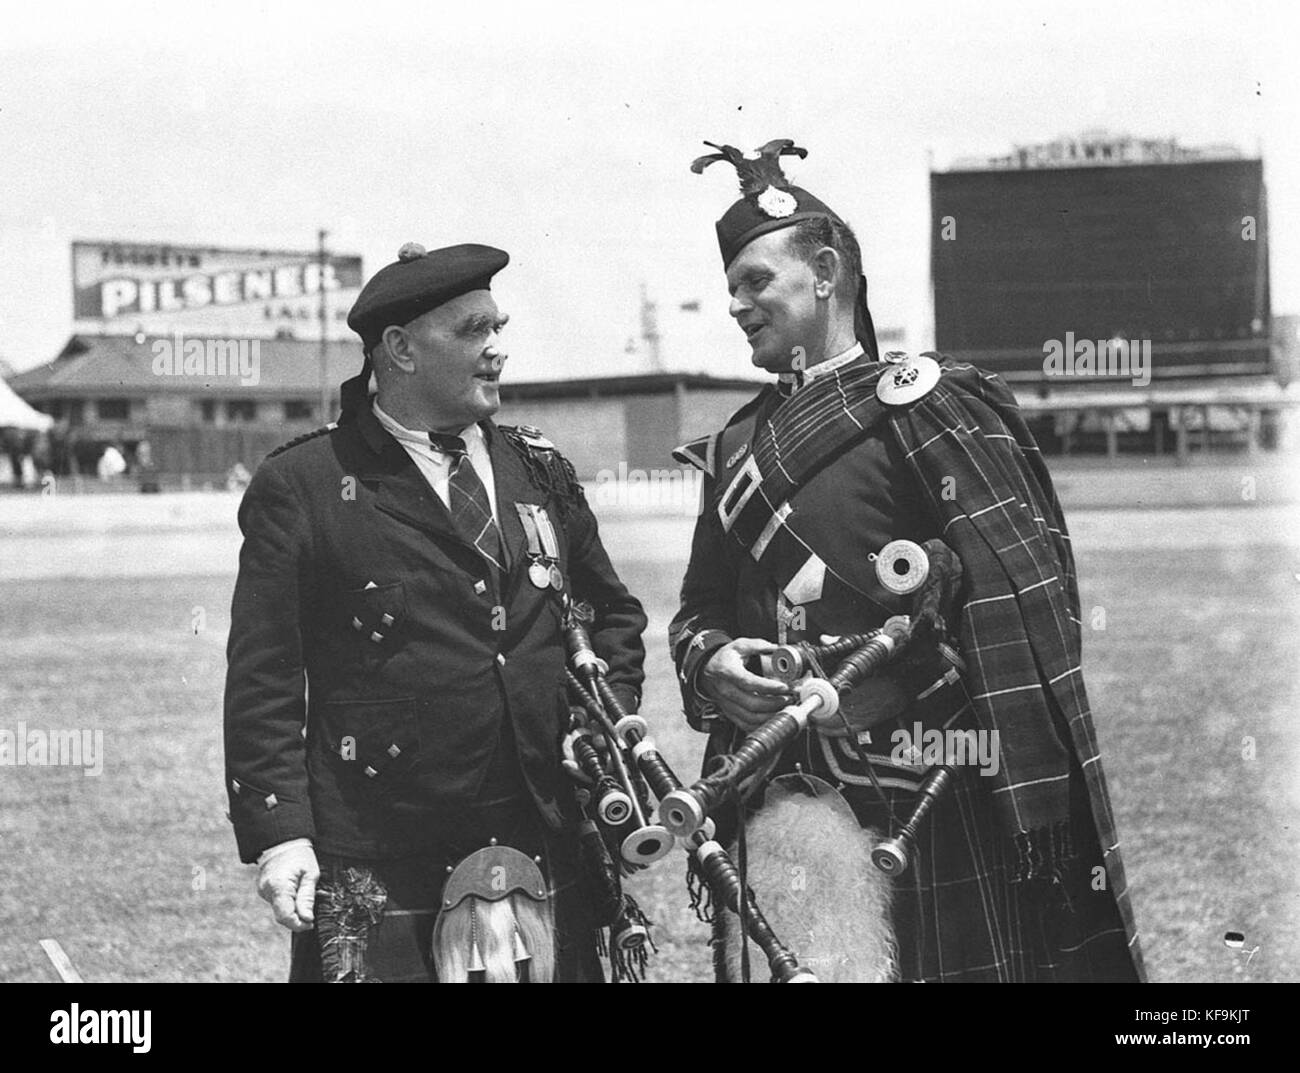 43462 Two Highland pipers talking together at the Highland Societys Caledonian Games Stock Photo